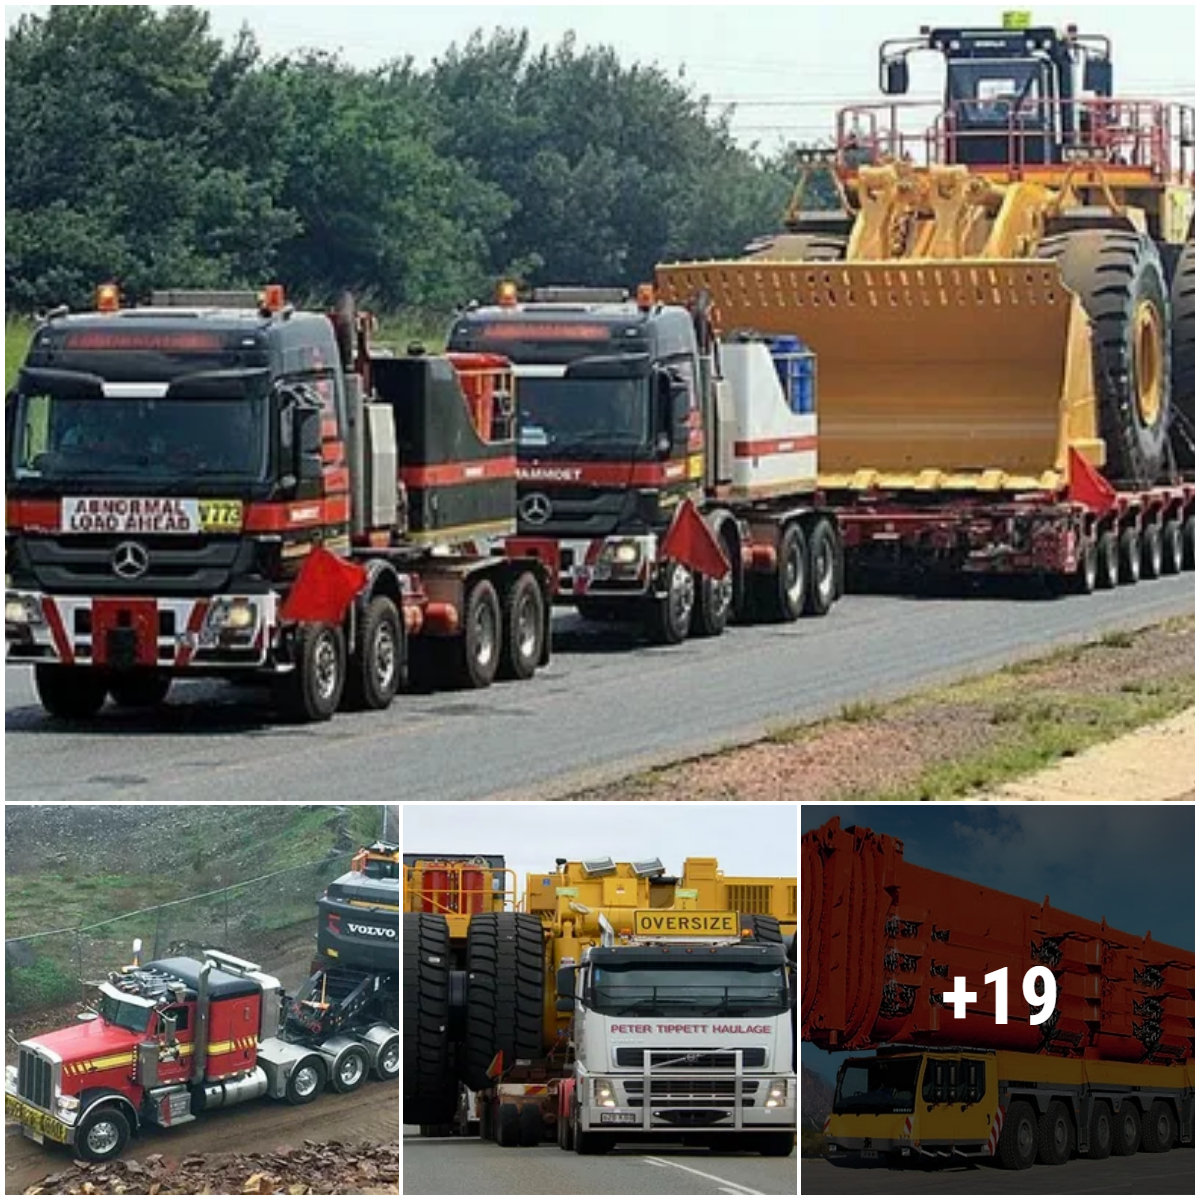 The world’s largest heavy machinery and vehicle operations knowledge base